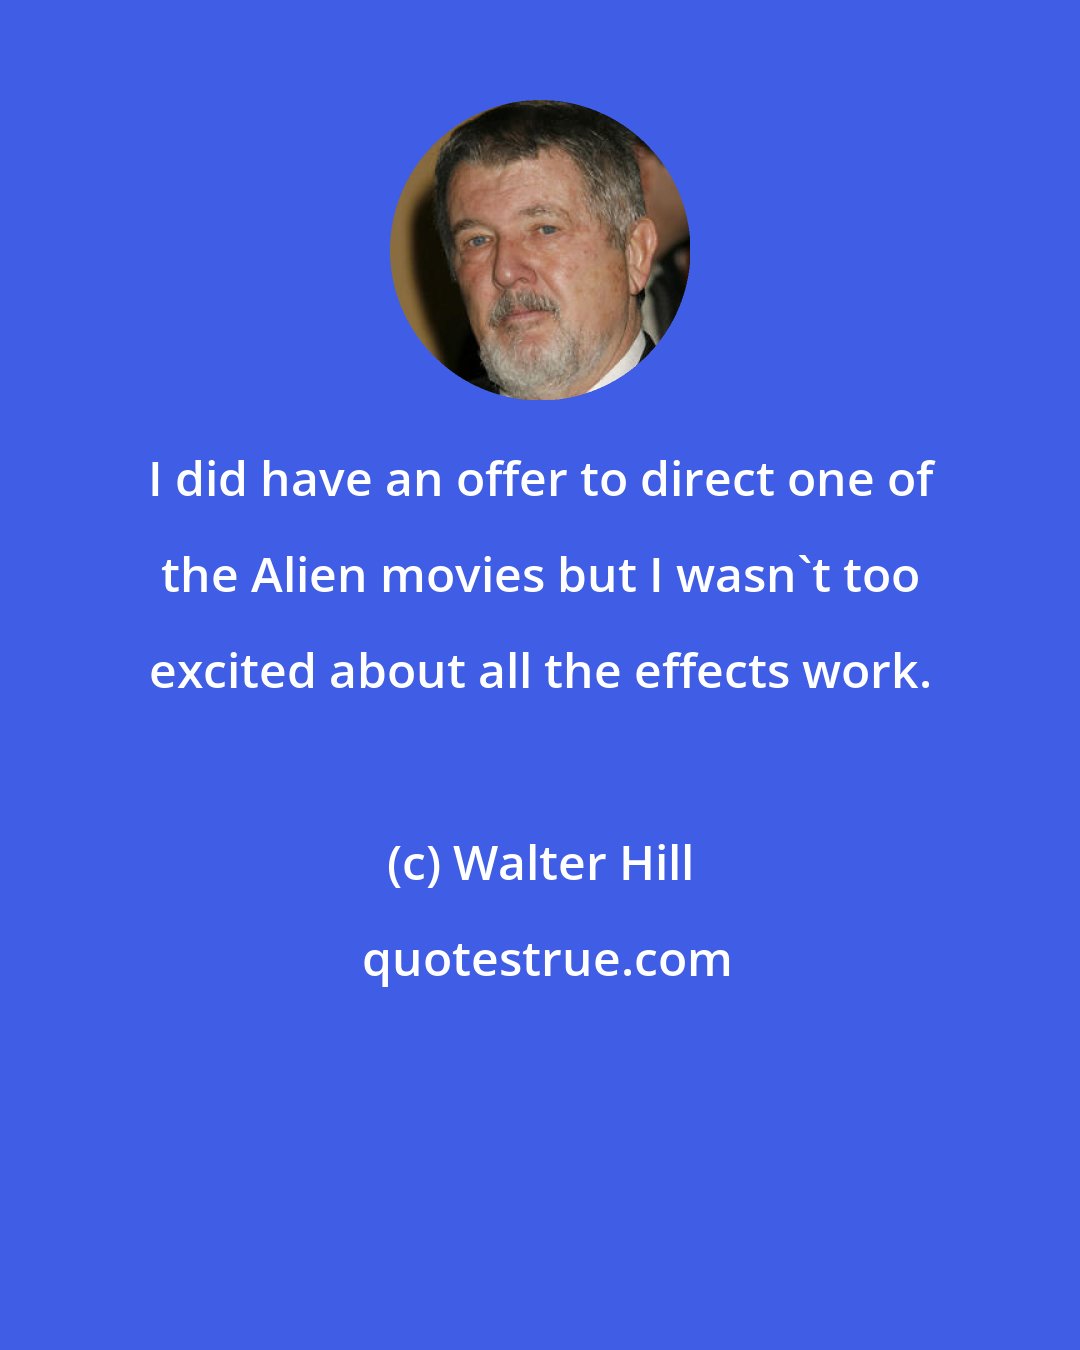 Walter Hill: I did have an offer to direct one of the Alien movies but I wasn't too excited about all the effects work.